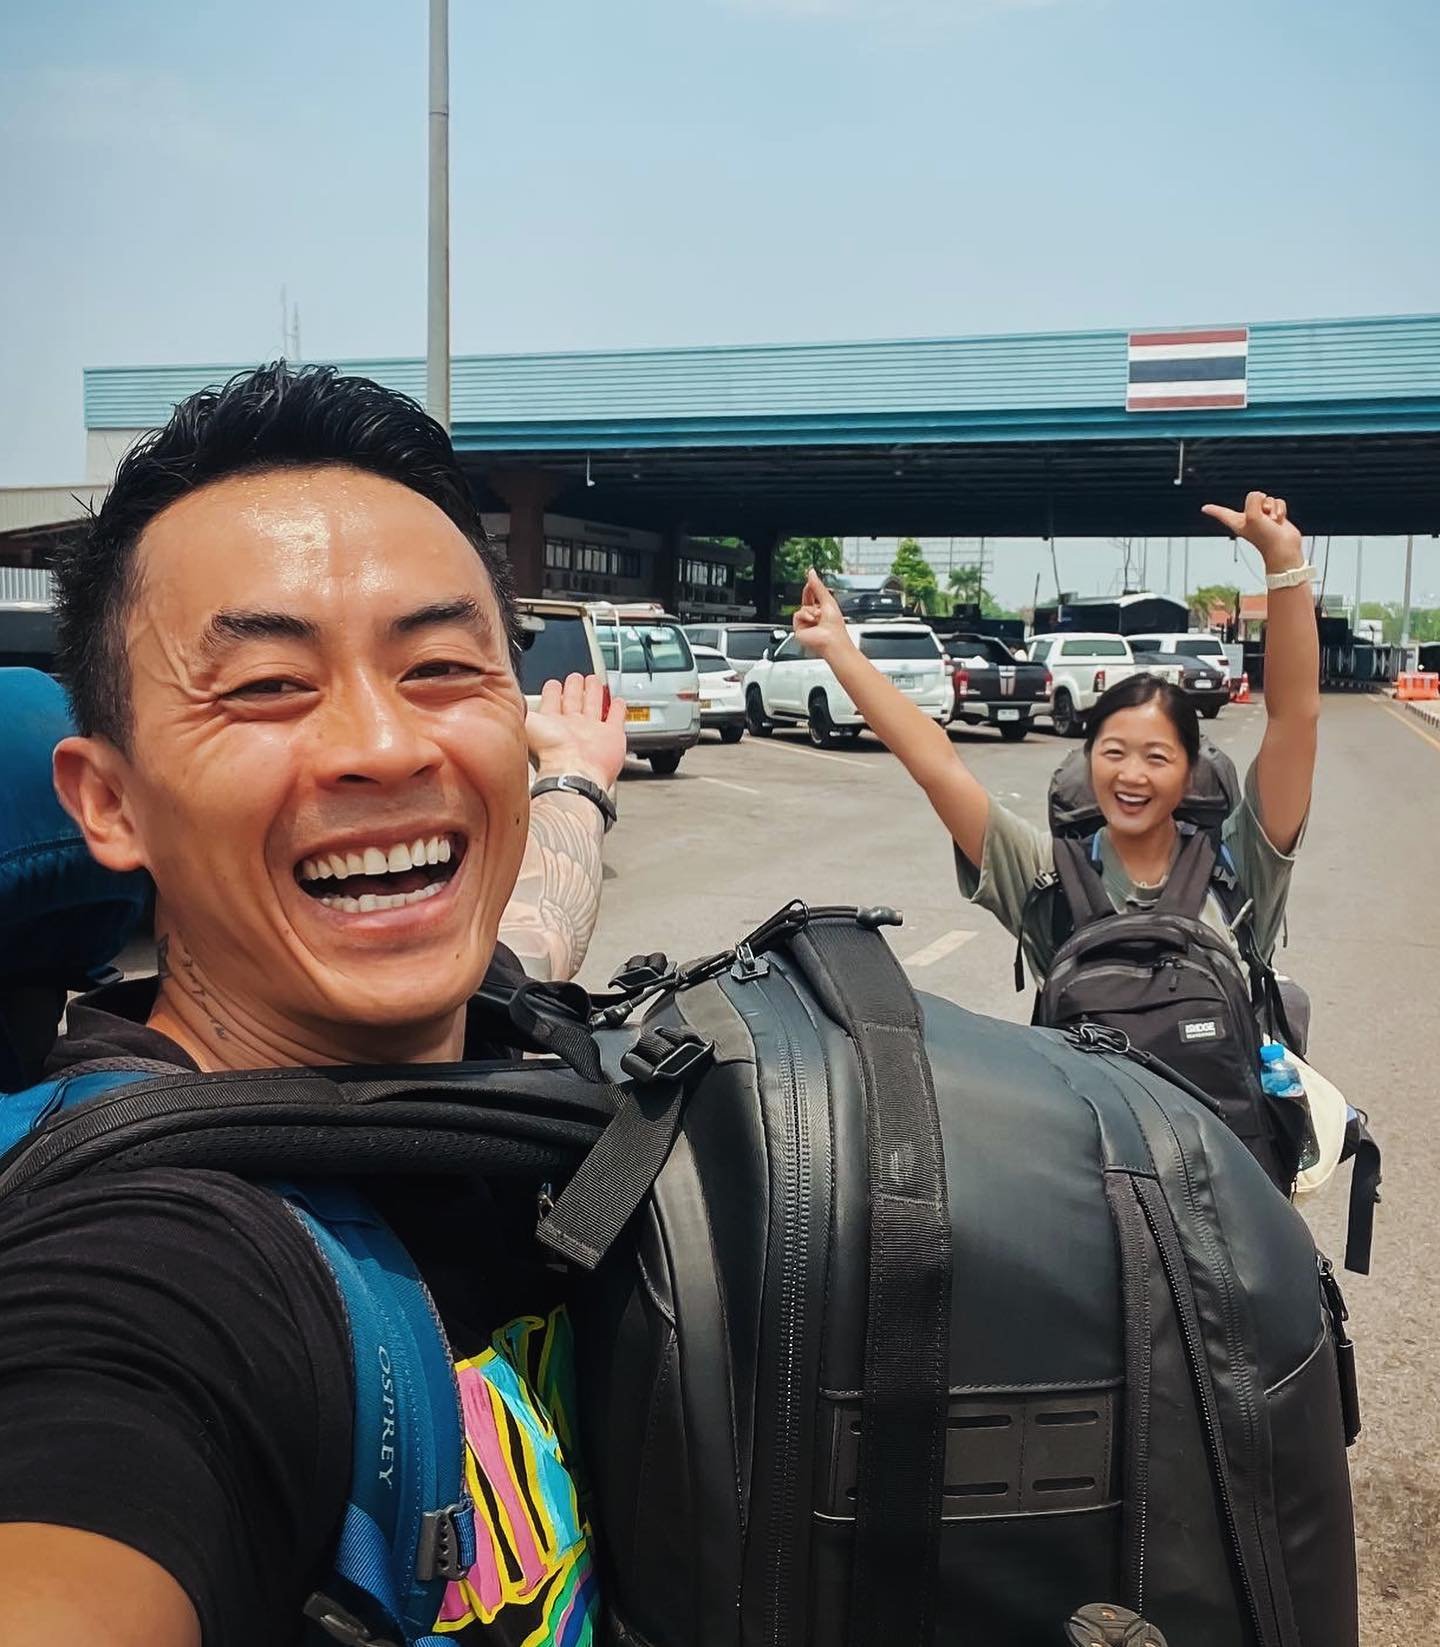 We just crossed the Thai-Lao border in Nong Khai 🇹🇭 We&rsquo;re over the moon to be back in Thailand after an amazing two-month journey traveling by land through China and Laos. Can&rsquo;t wait to share with you all the fun things we&rsquo;ve done